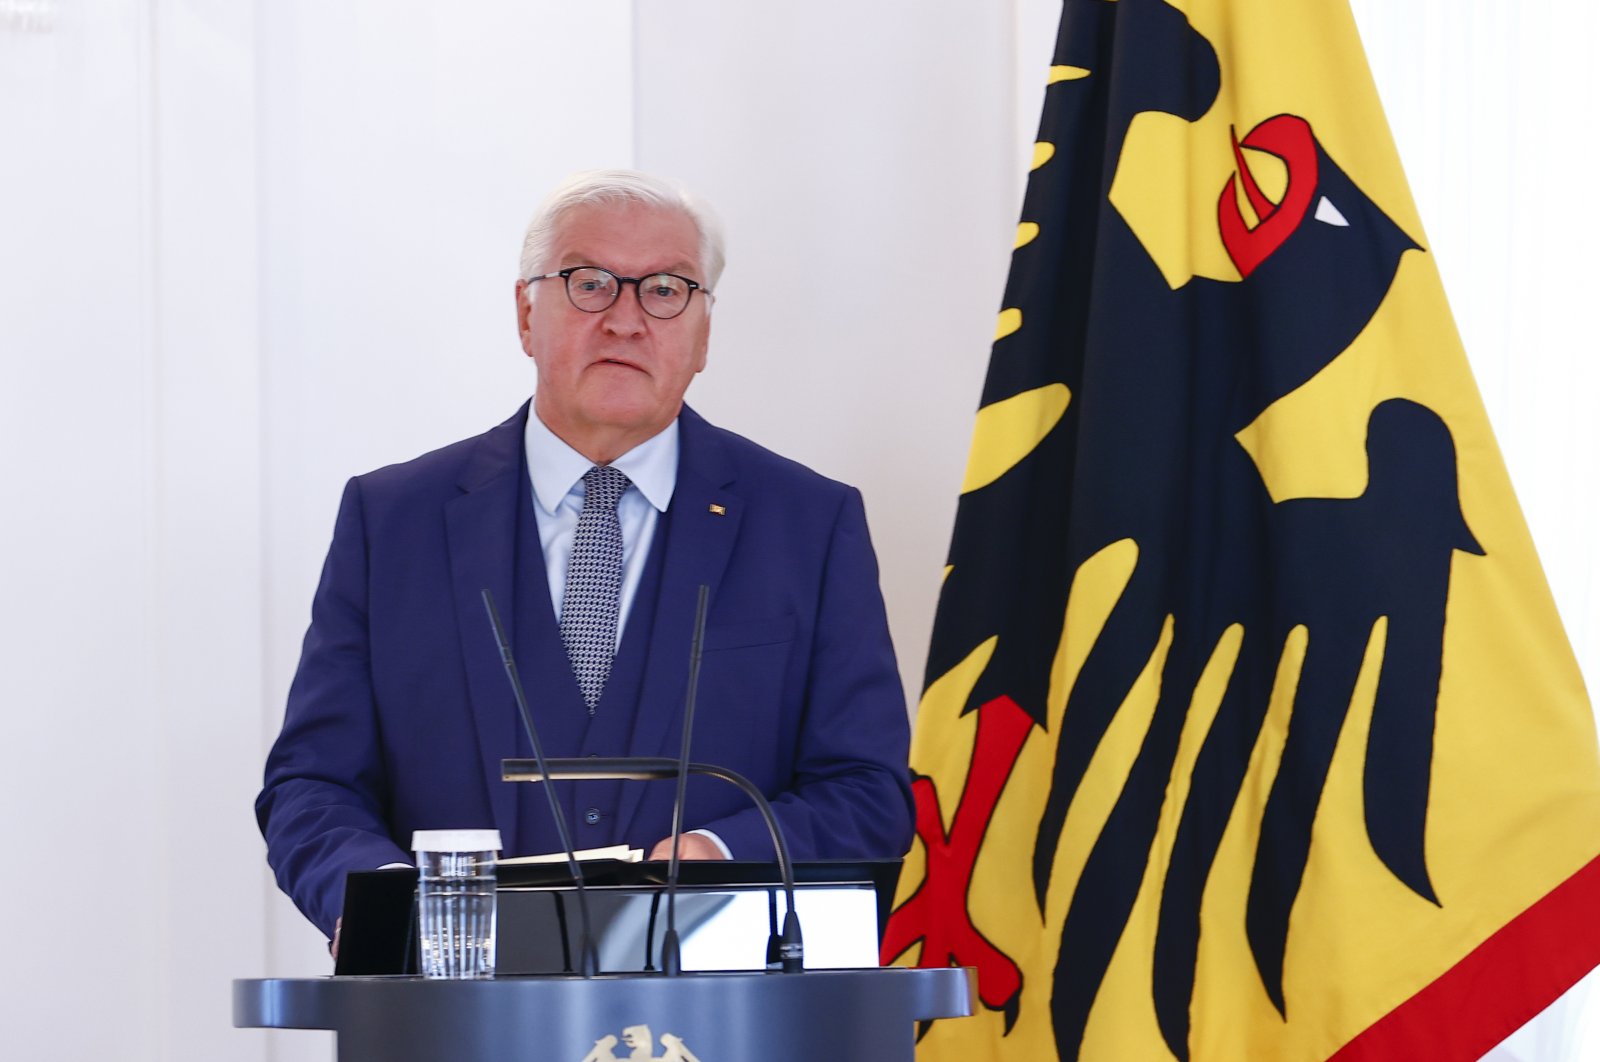 German President Frank-Walter Steinmeier speaks at a ceremony marking the 60th anniversary of the signing of the German-Turkish labor agreement in Berlin, Germany, Sept. 10, 2021. (AA Photo)